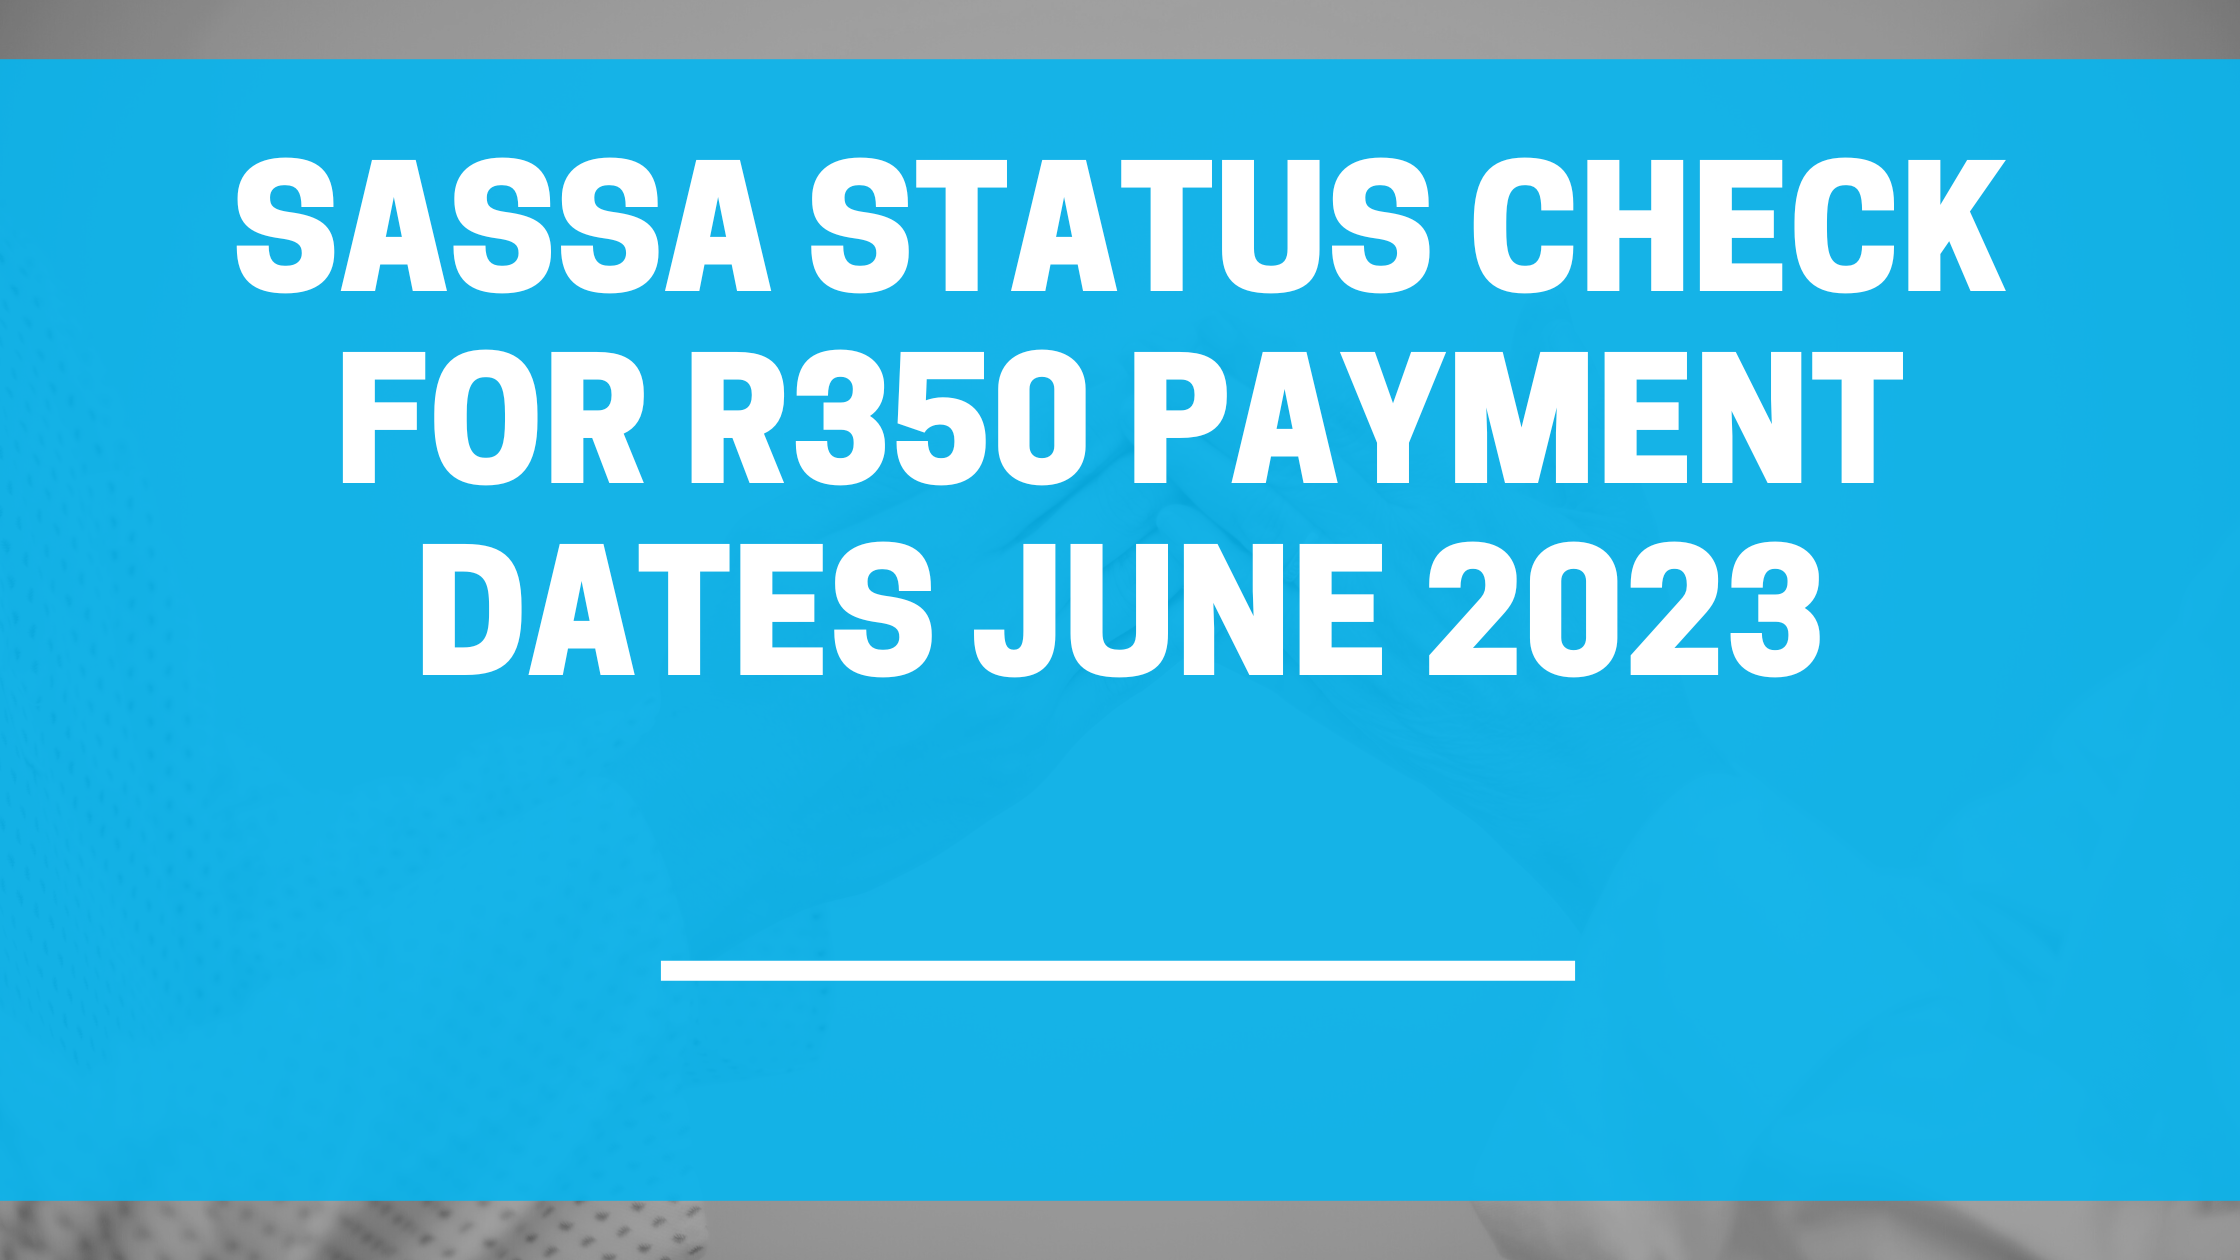 SASSA Status Check for R350 Payment Dates JUNE 2023